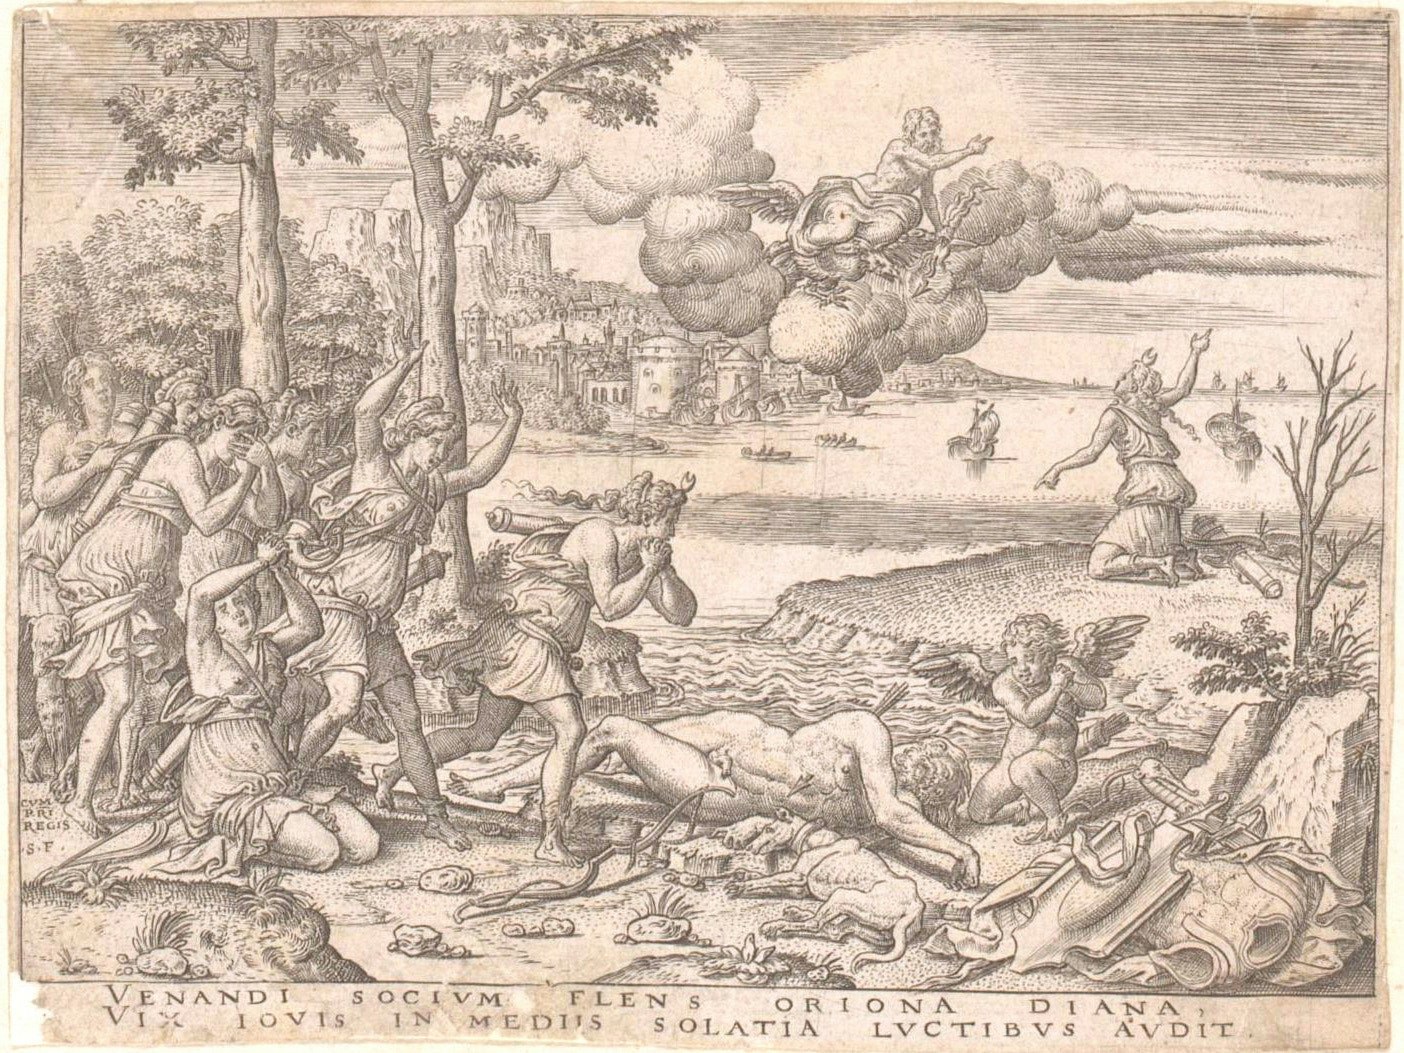 Orion is Killed by Diana During the Hunt Etching 1547-1548 Rijksmuseum